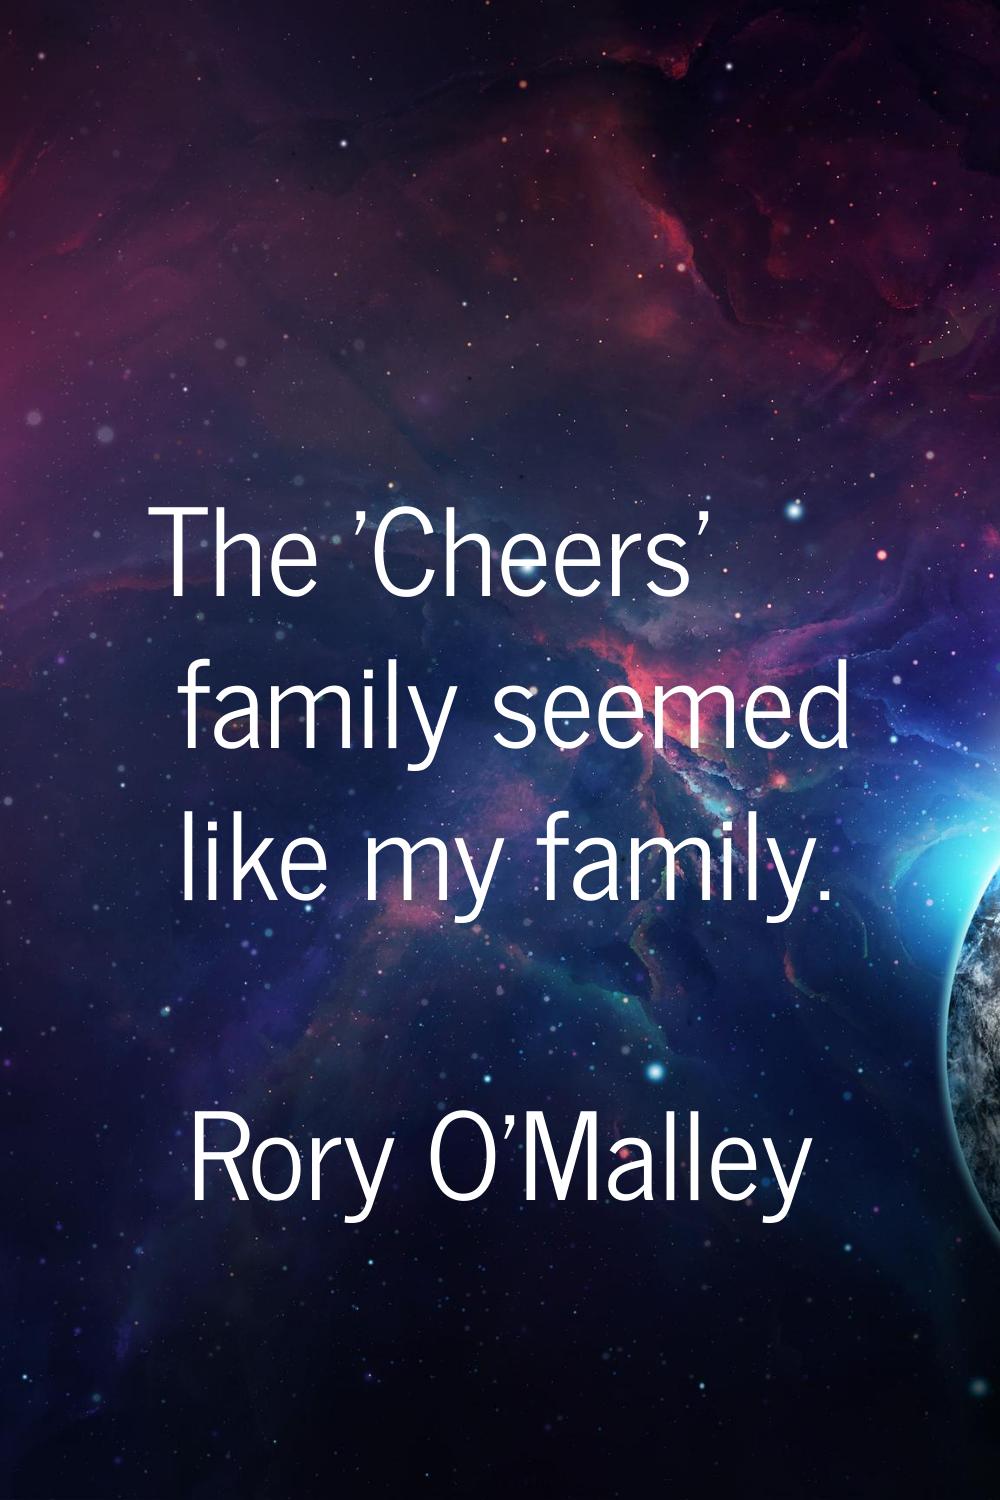 The 'Cheers' family seemed like my family.